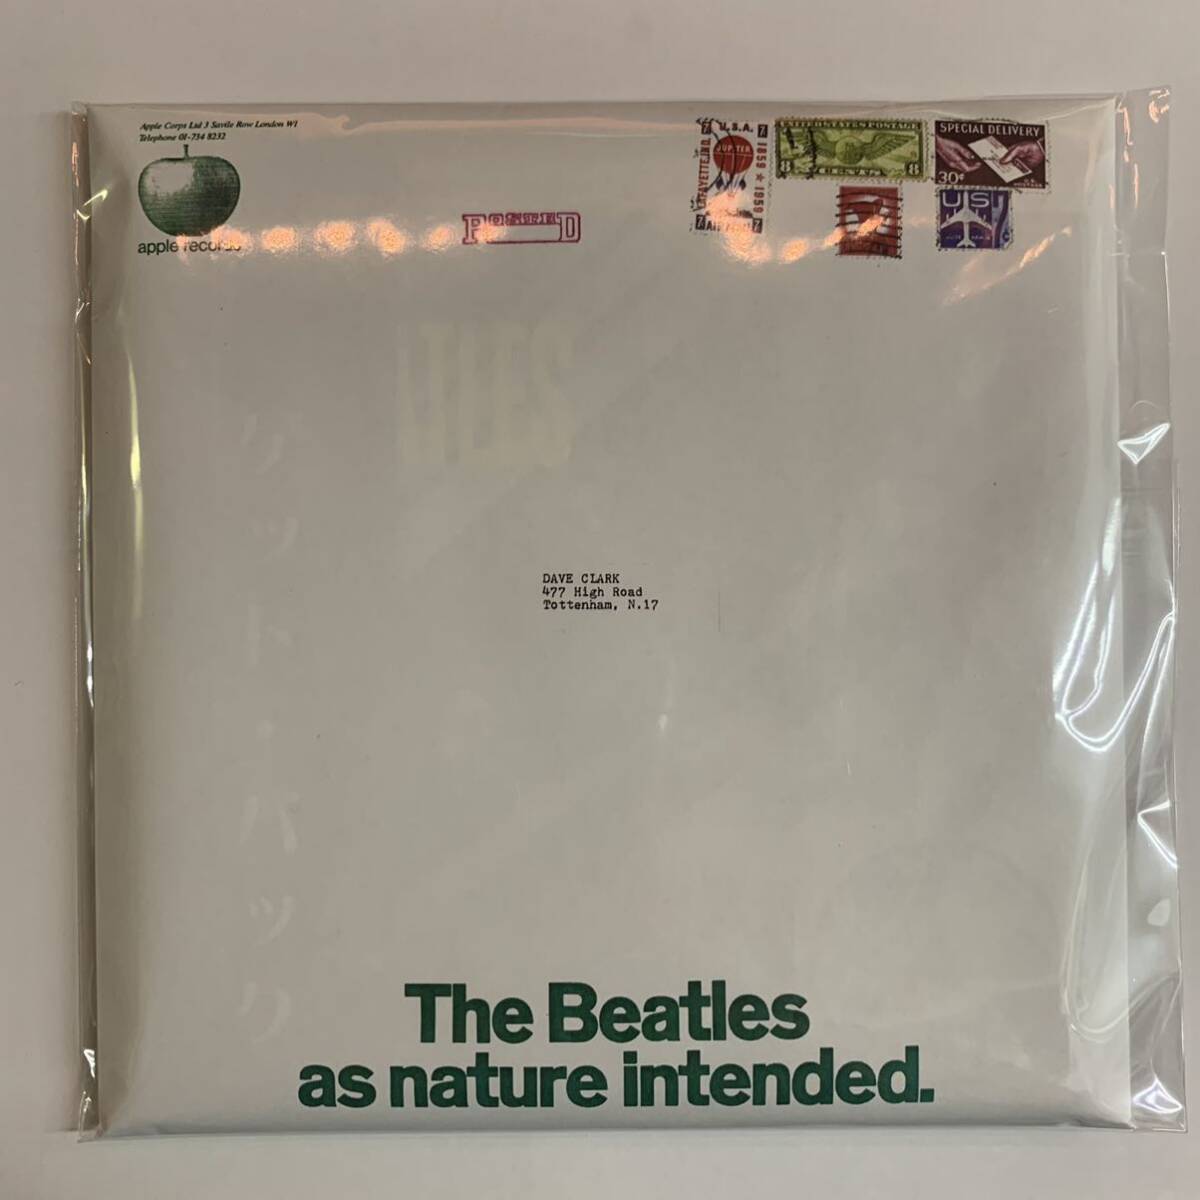 THE BEATLES : GET BACK STEREO DEMIX (CD)ROOF TOP STEREO DEMIX (CD) 限定AS NATURE INTENDED 封筒入り！完売タイトル！_画像2